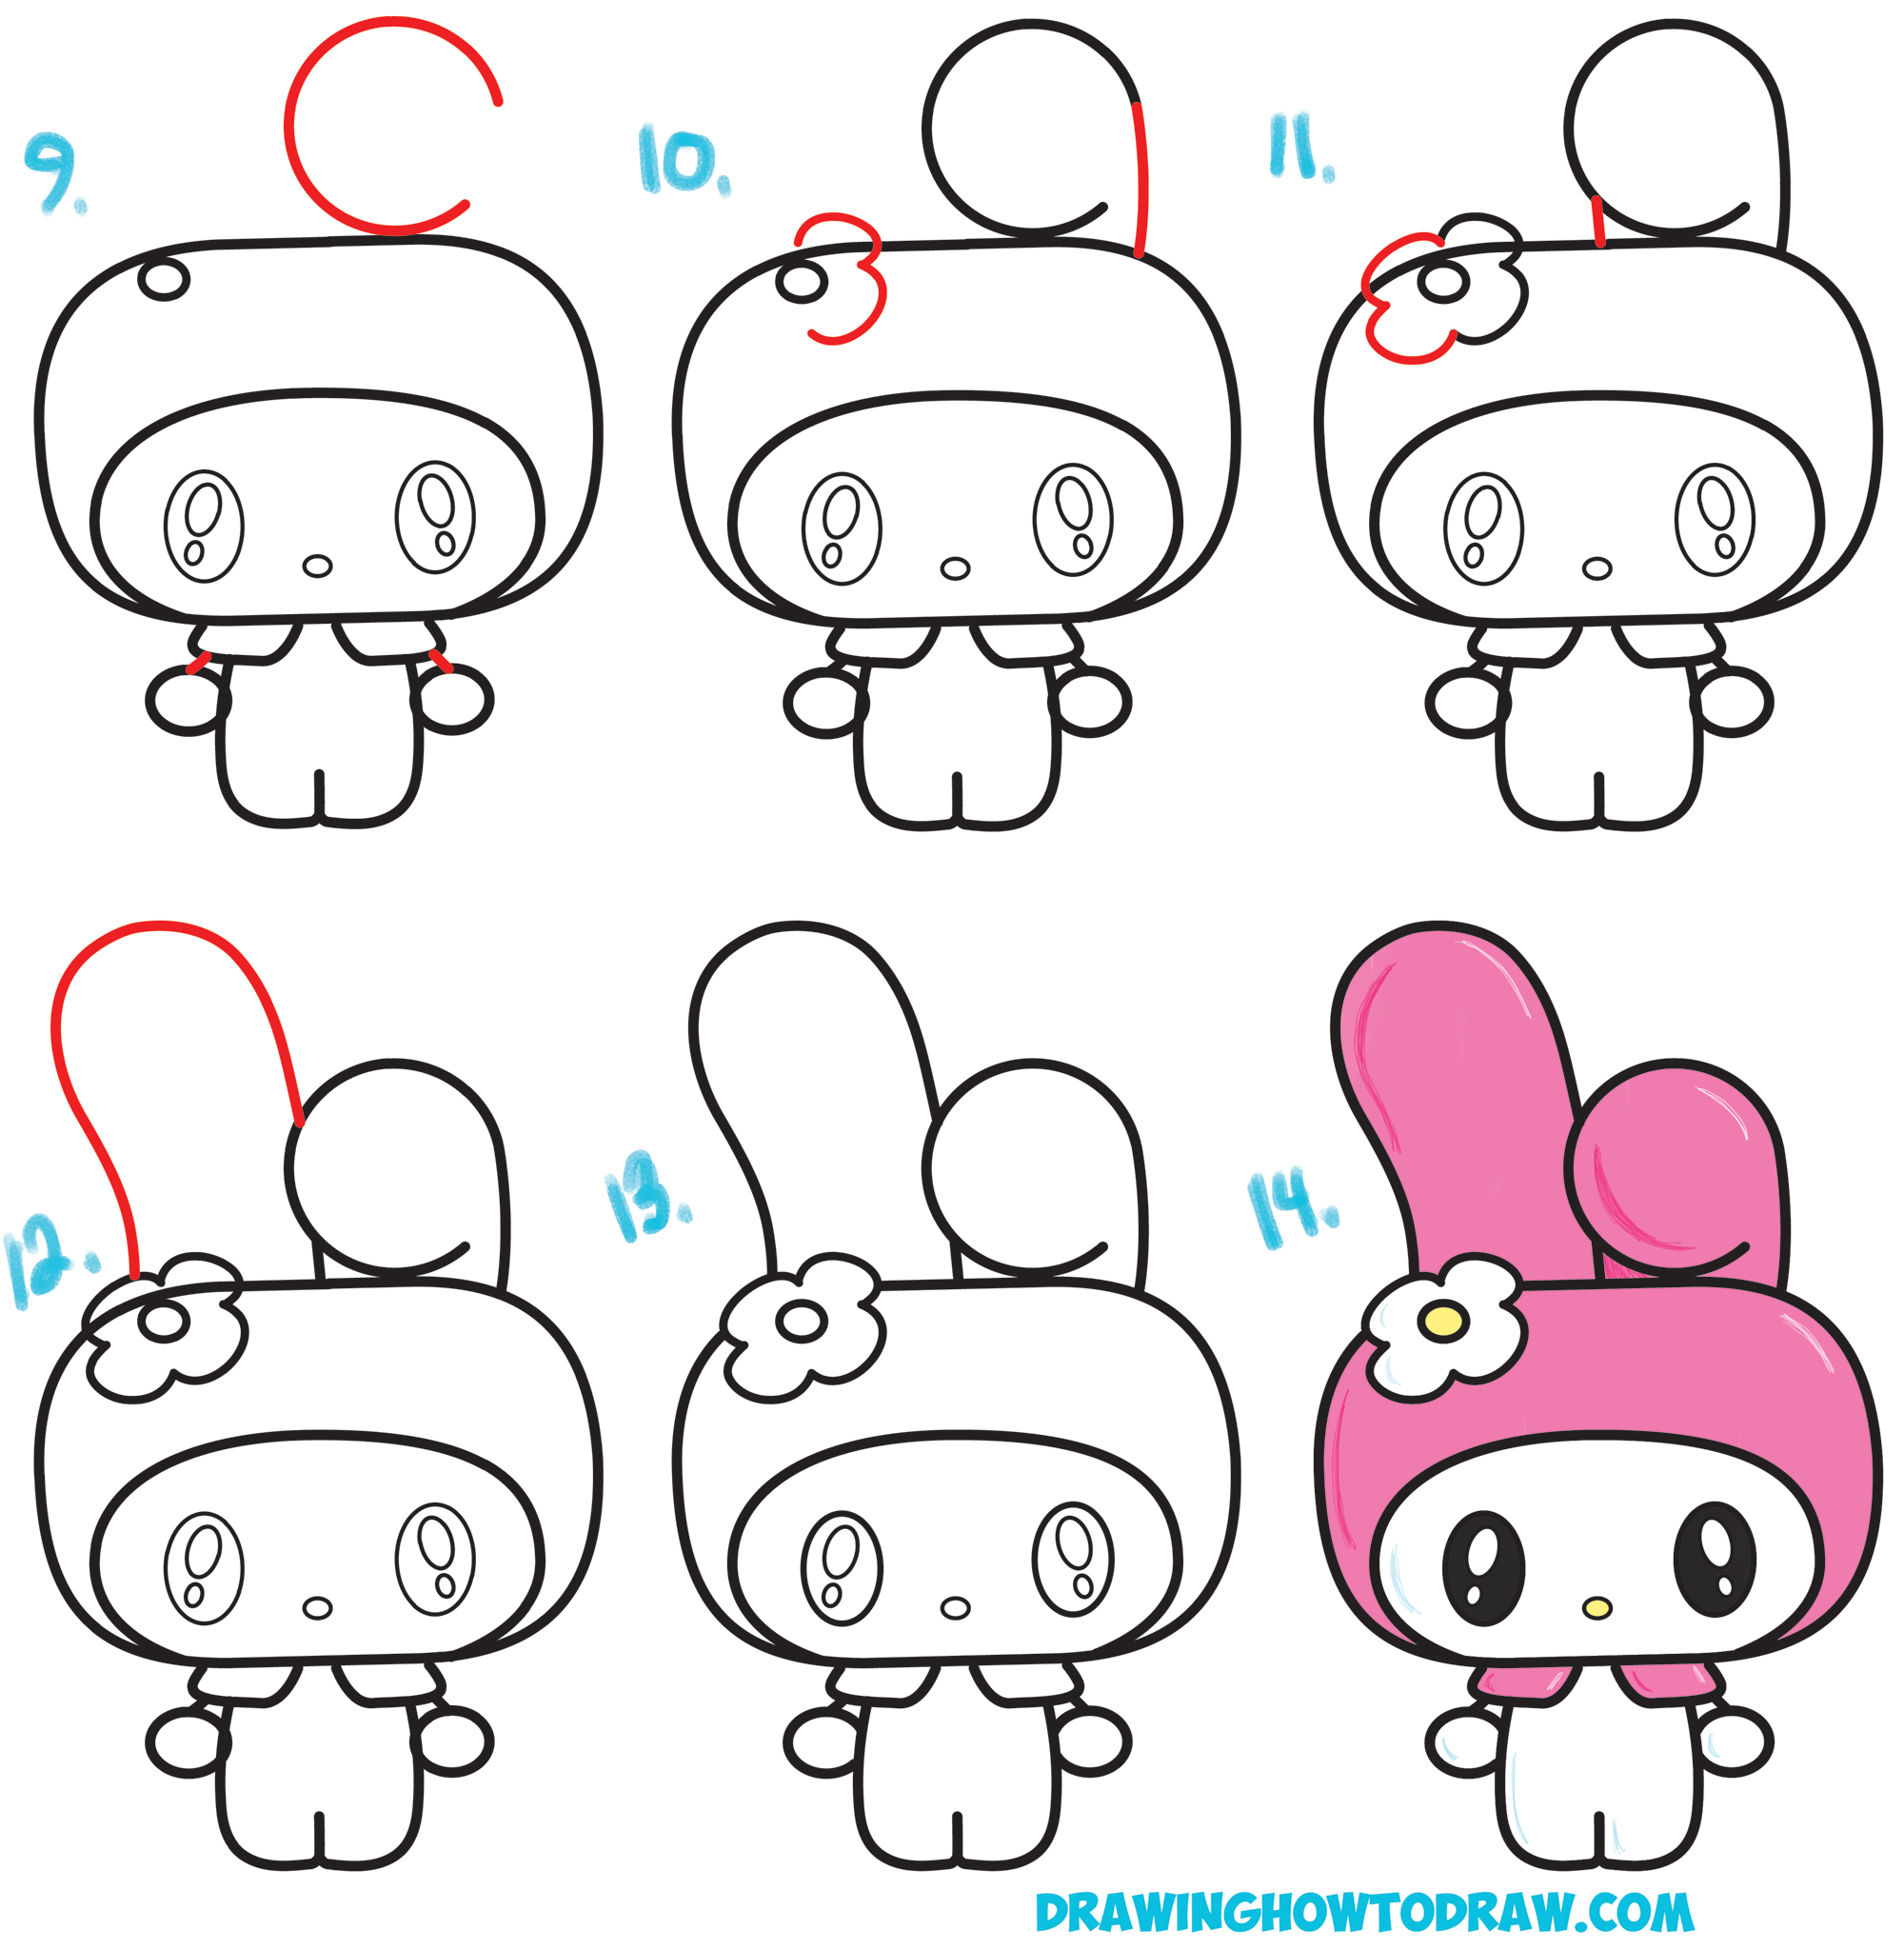 How to Draw Kawaii / Chibi My Melody from Hello Kitty : A Cute Bunny ...